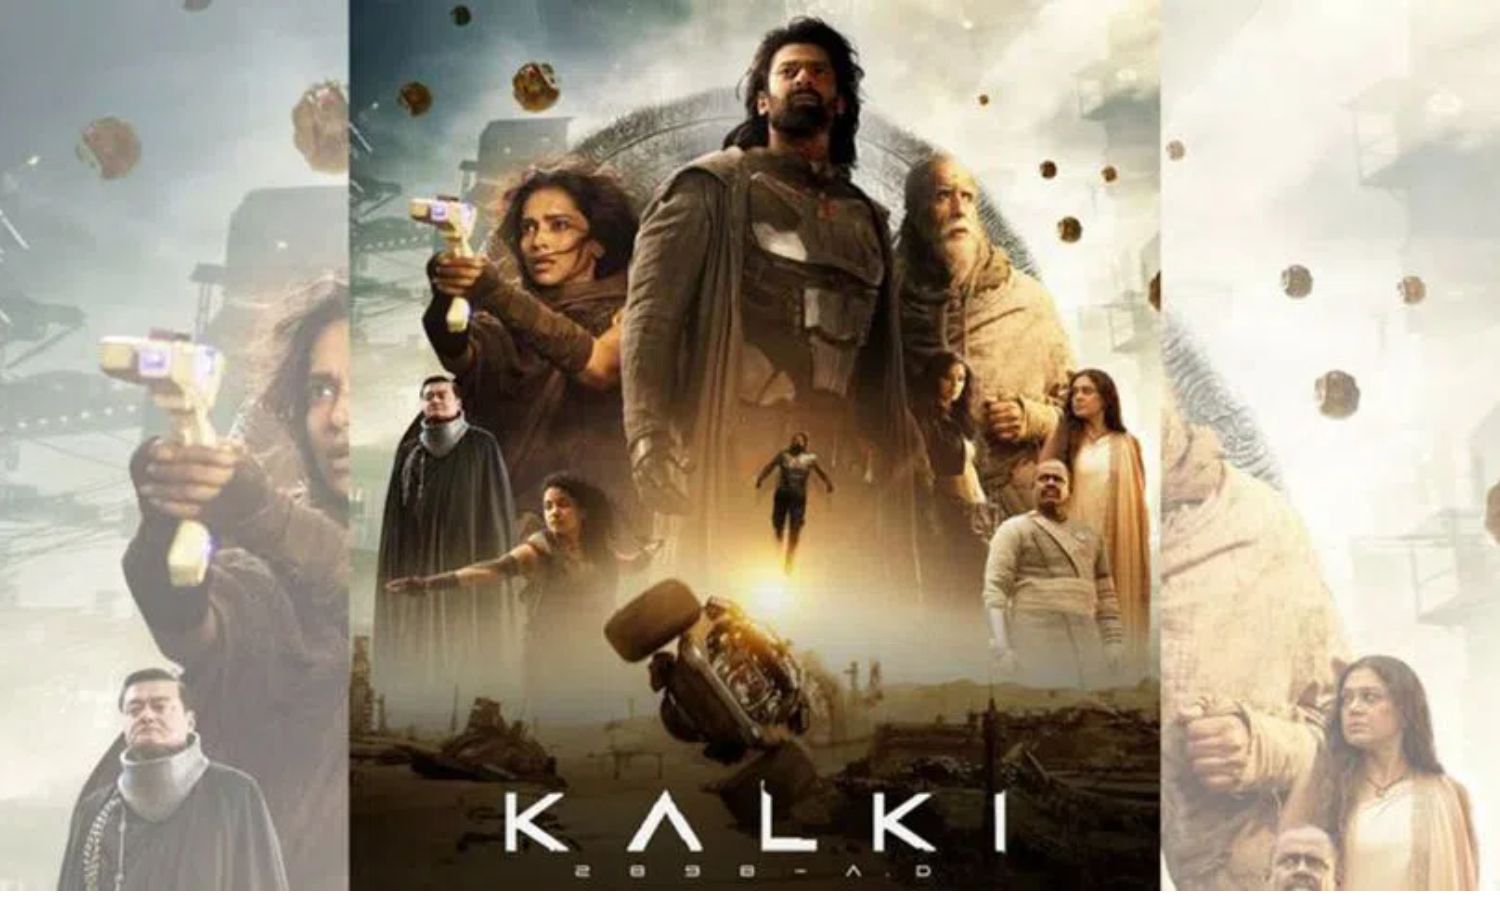 Box Office collections of Kalki 2898 AD